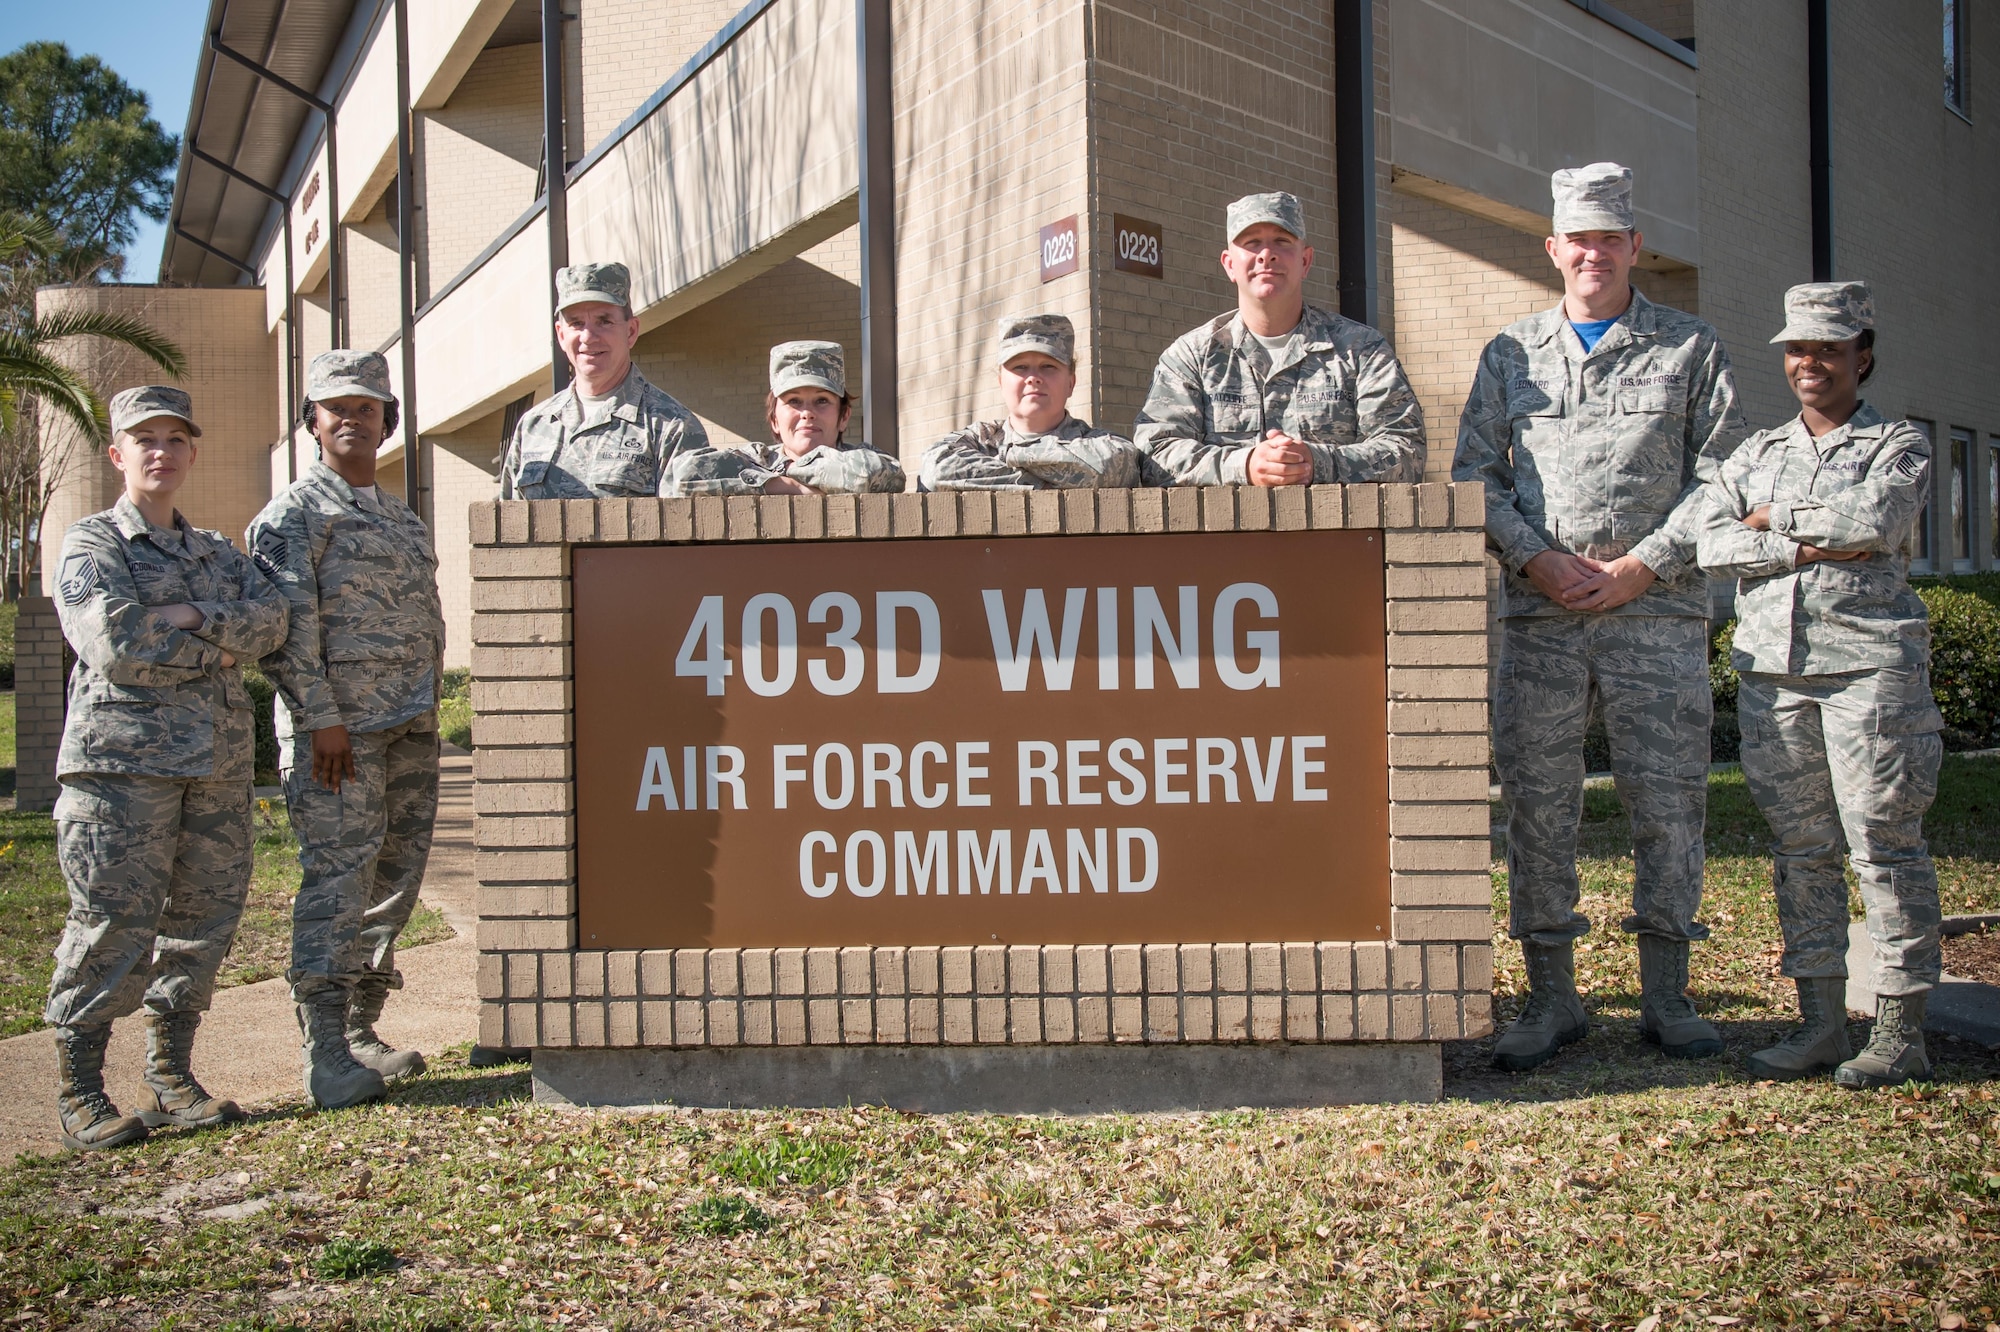 First sergeants from the 403rd Wing pose for a group photo March 3, 2017 at Keesler Air Force Base, Mississippi. (U.S. Air Force photo/Staff Sgt. Heather Heiney)